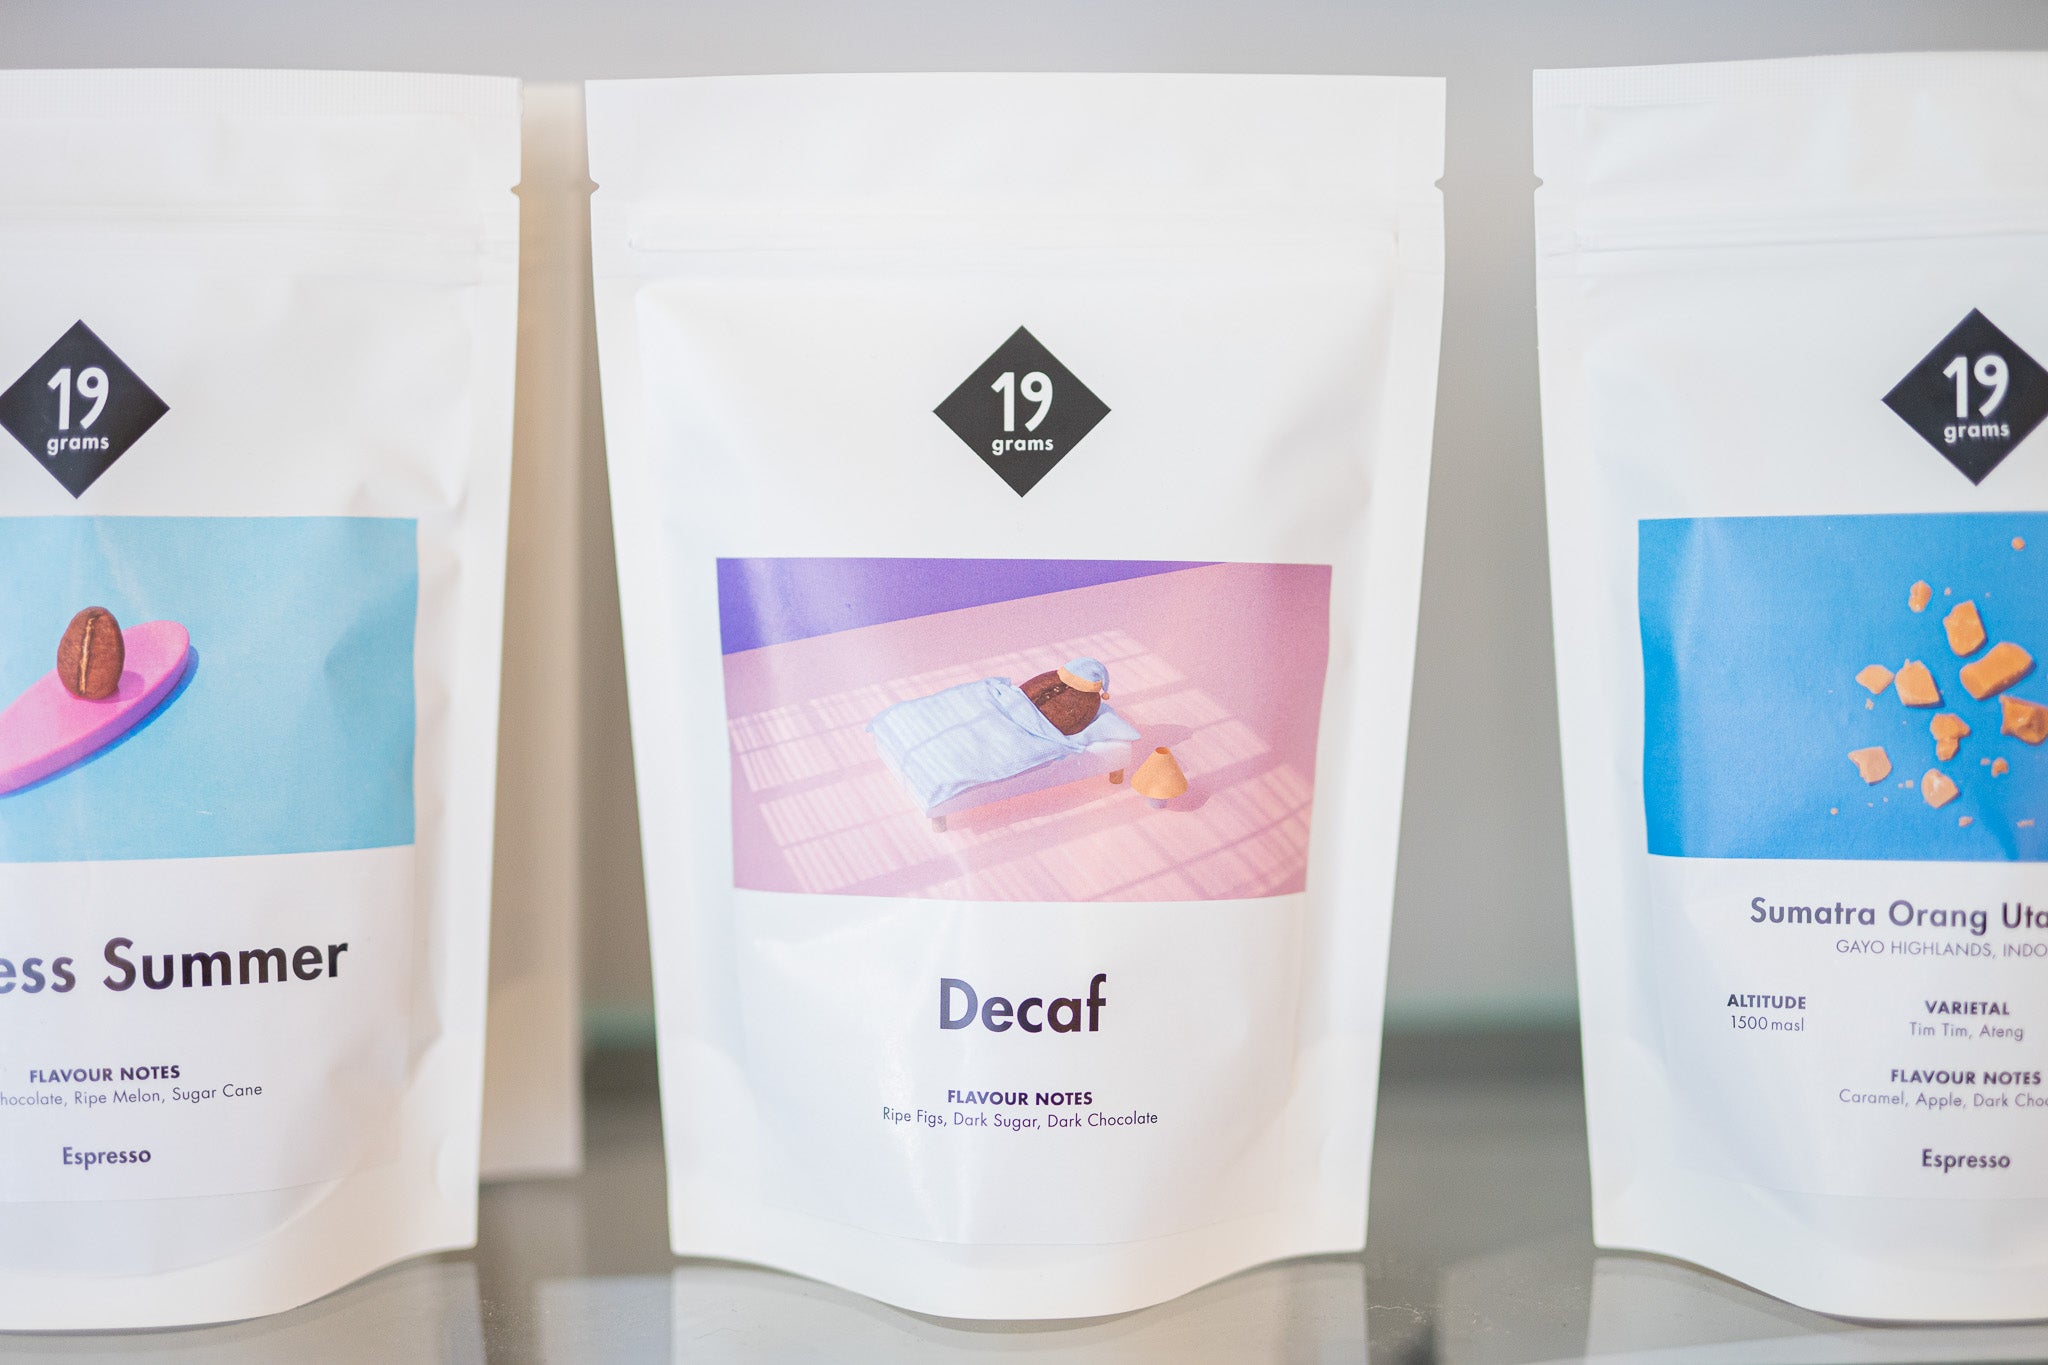 a bag of 19grams decaf coffee beans sits on a shelf